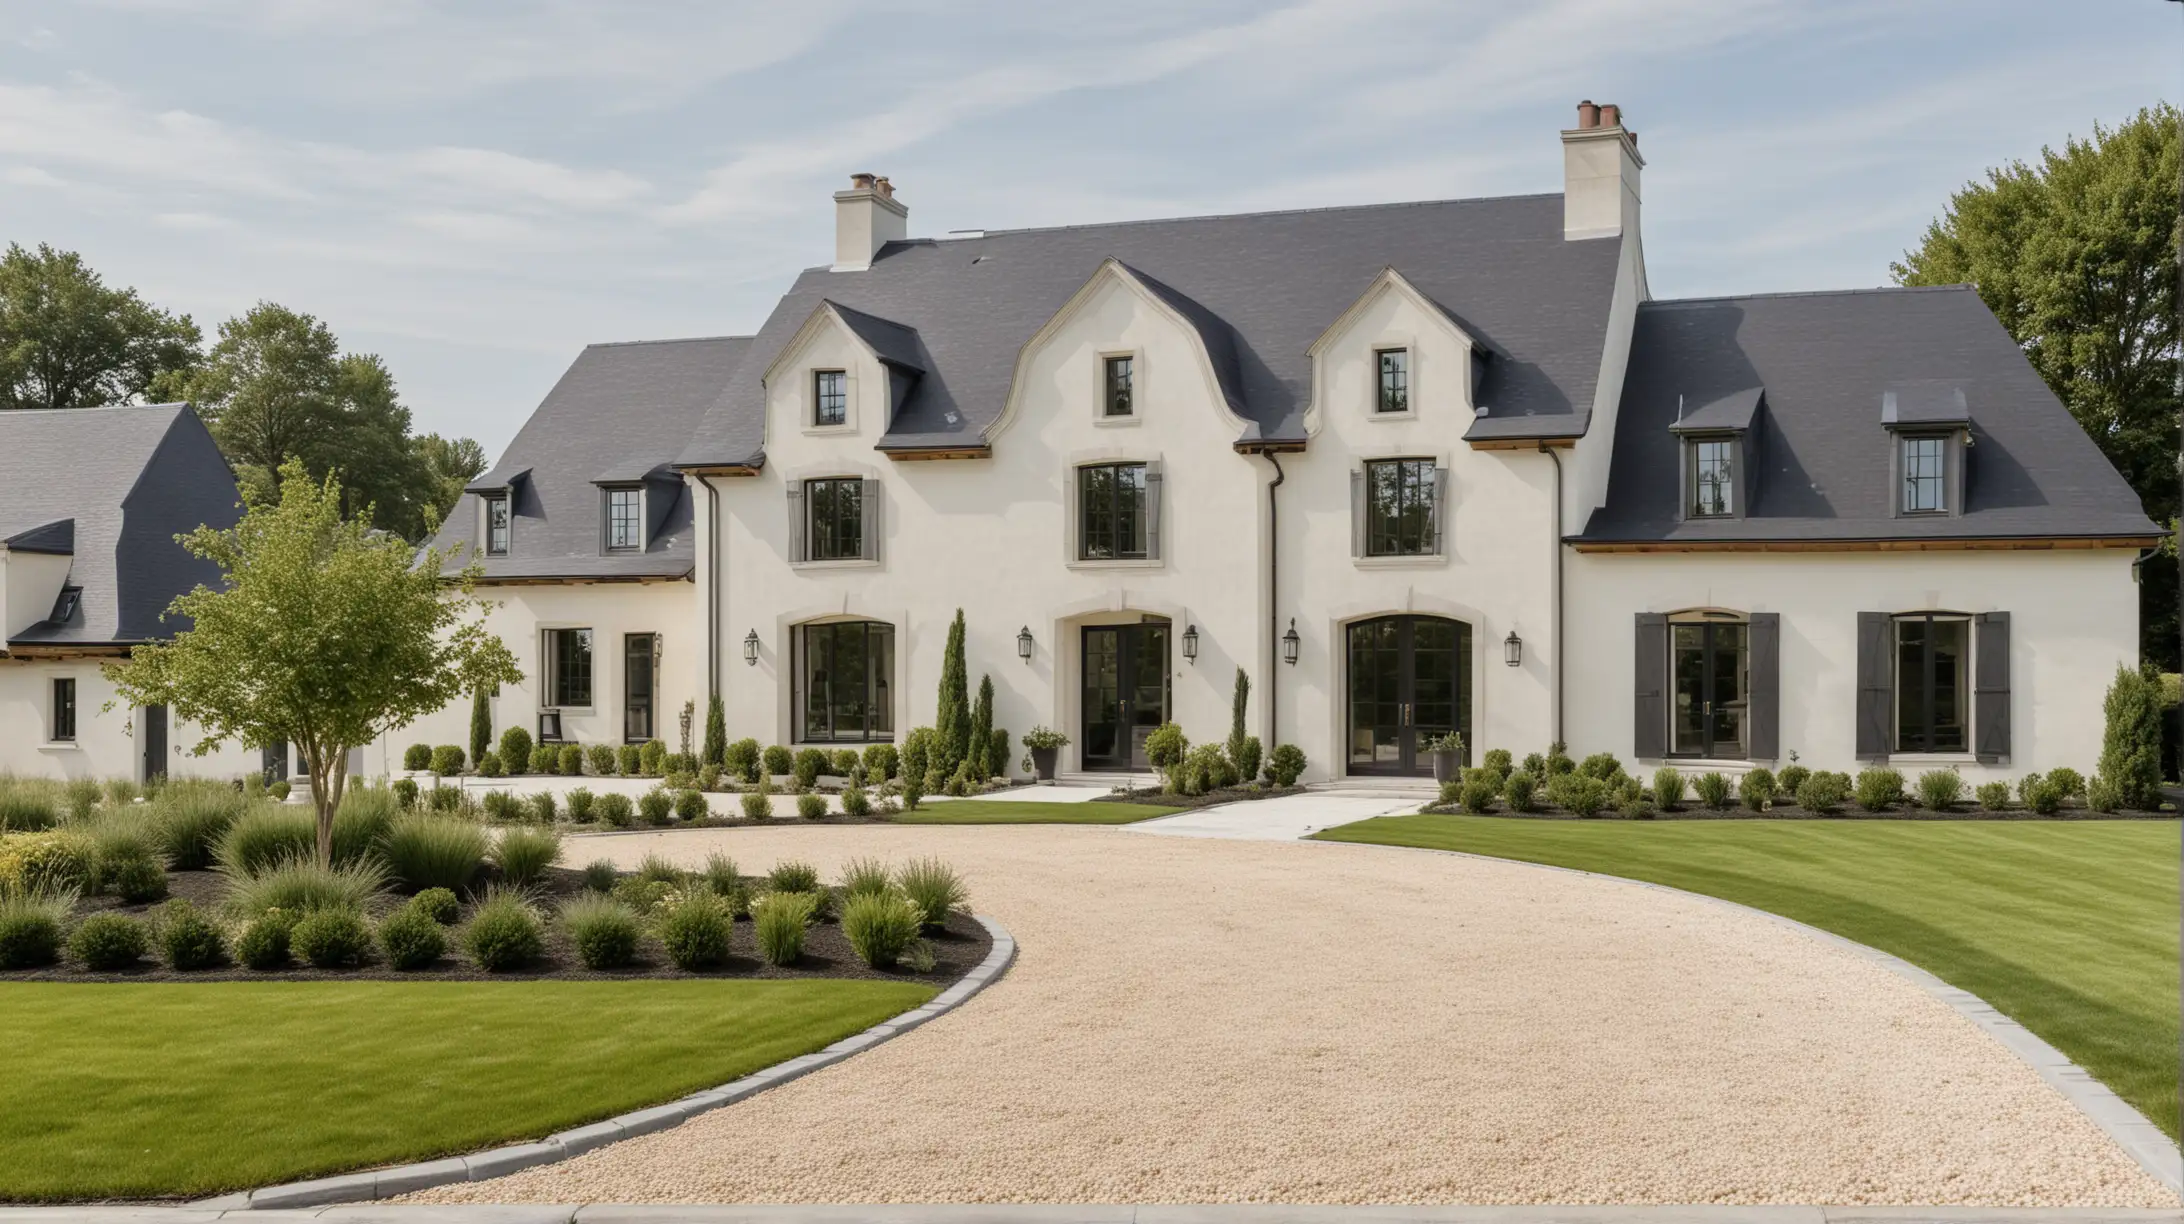 Modern French Farmhouse with Black Roof and Expansive Frontyard